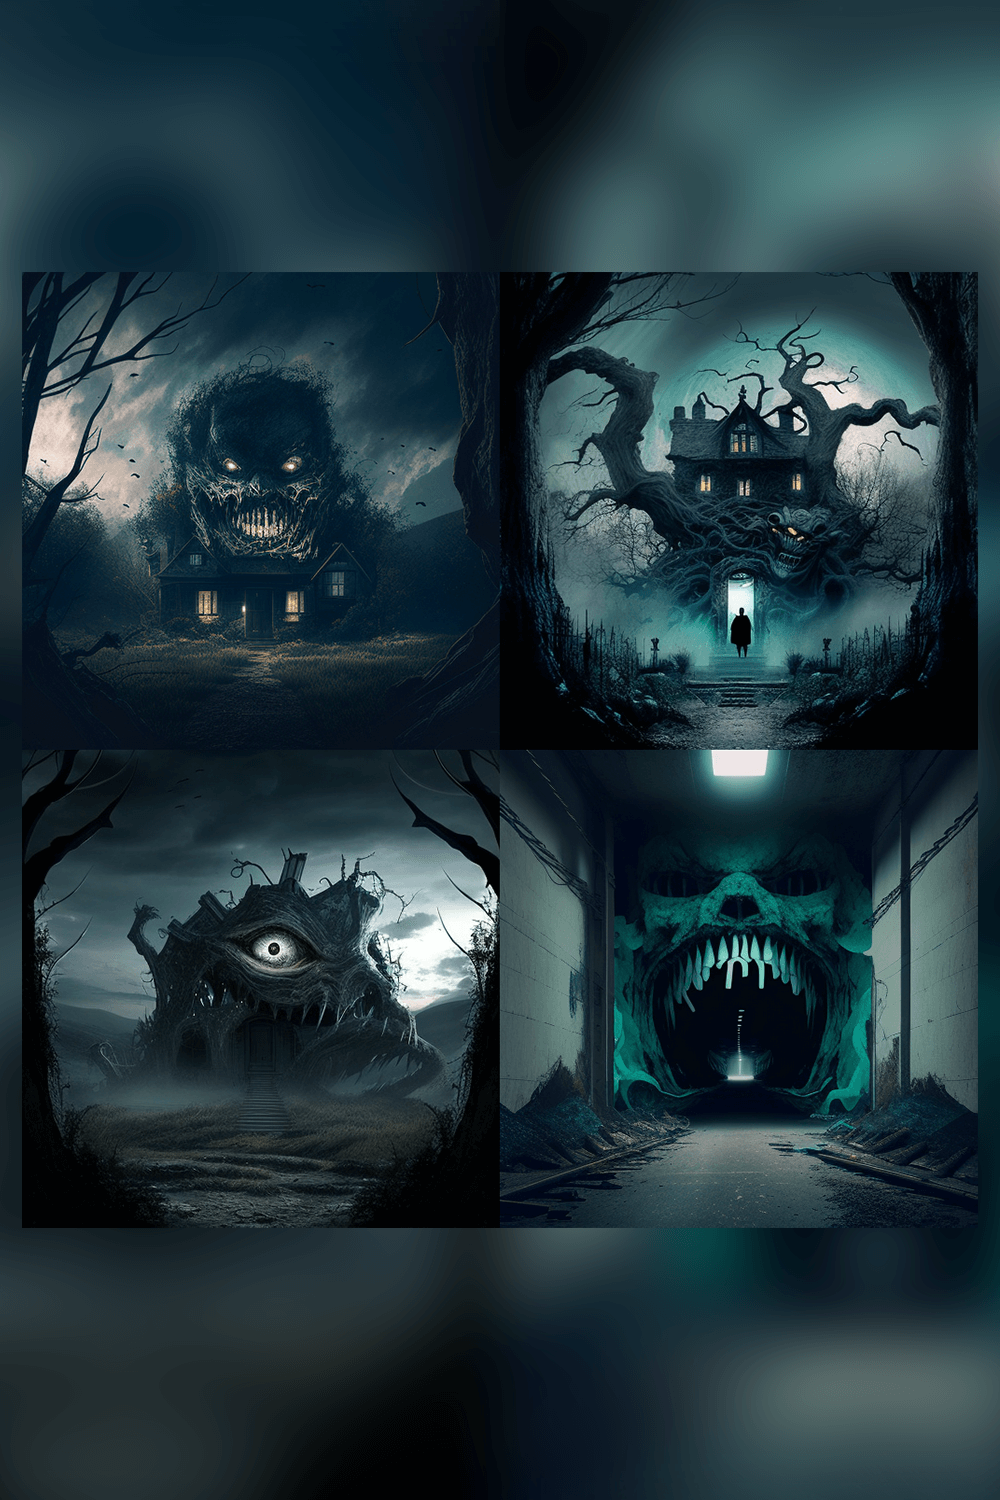 Series of photoshopped images of a creepy house.